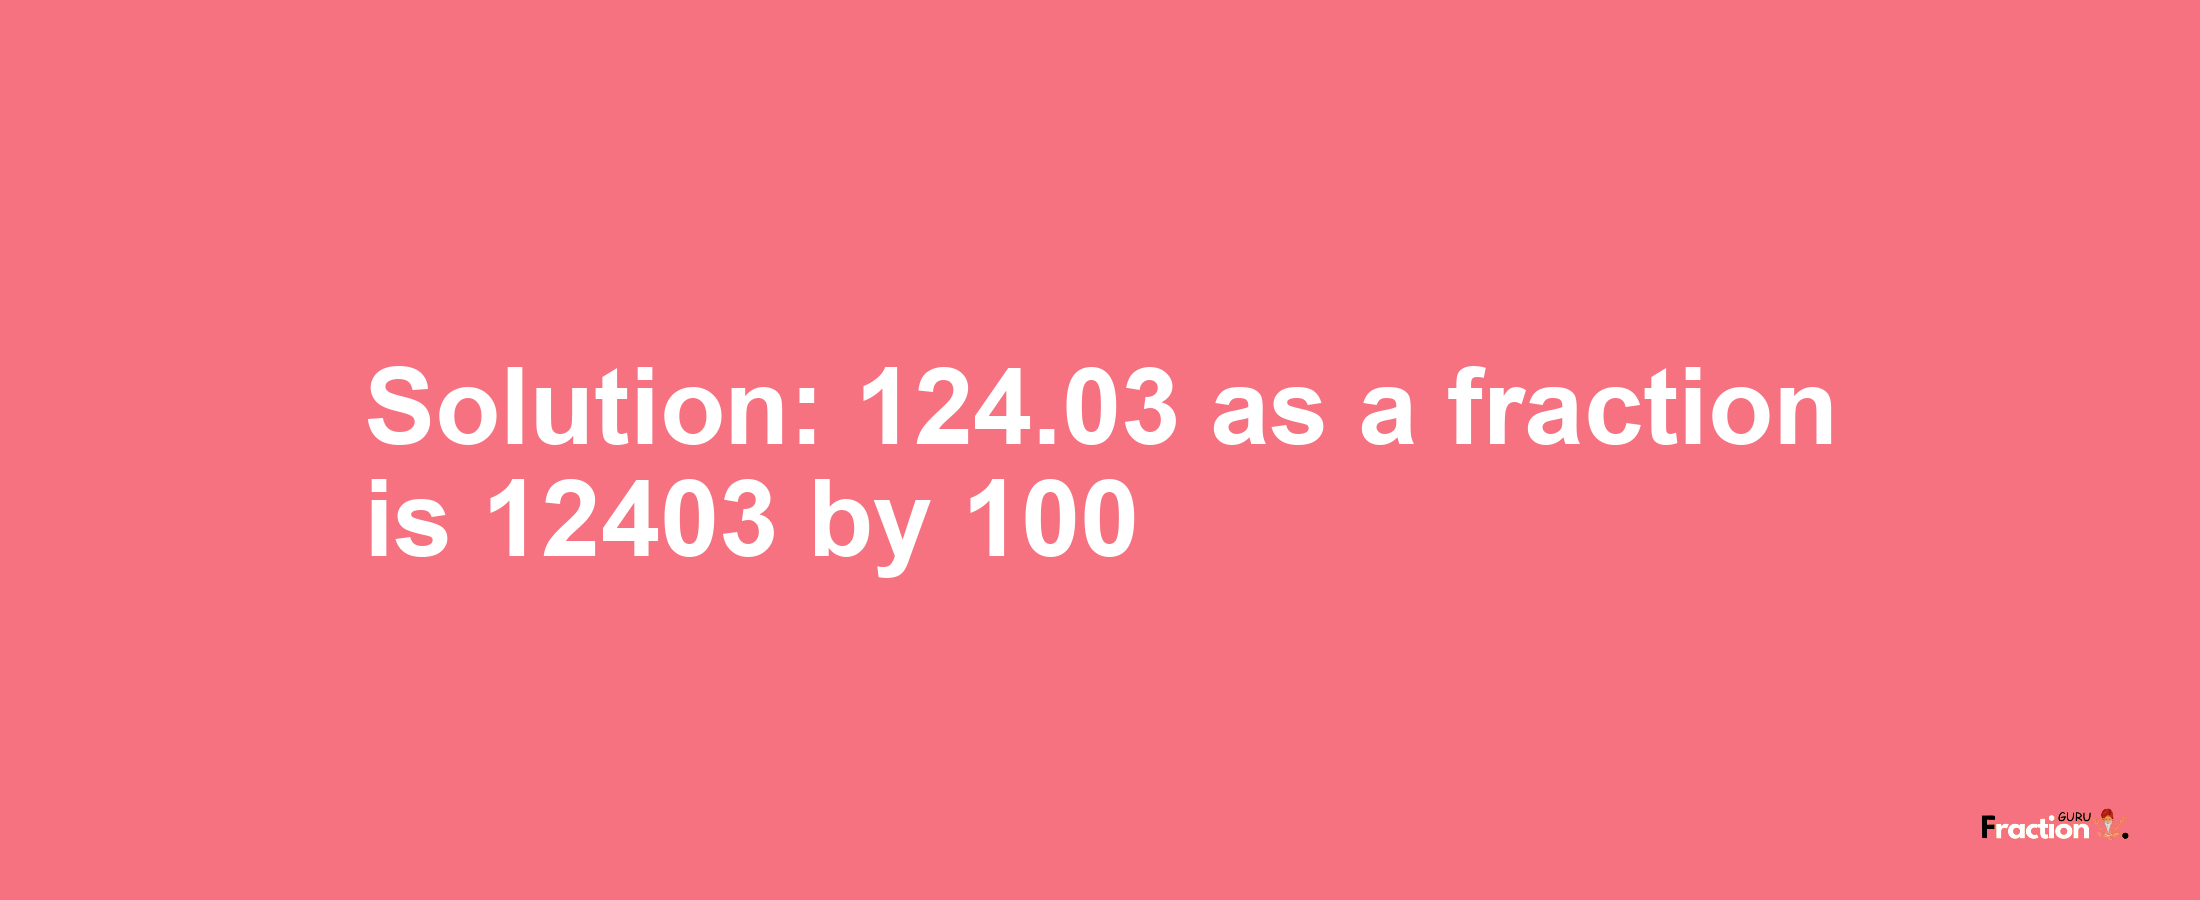 Solution:124.03 as a fraction is 12403/100